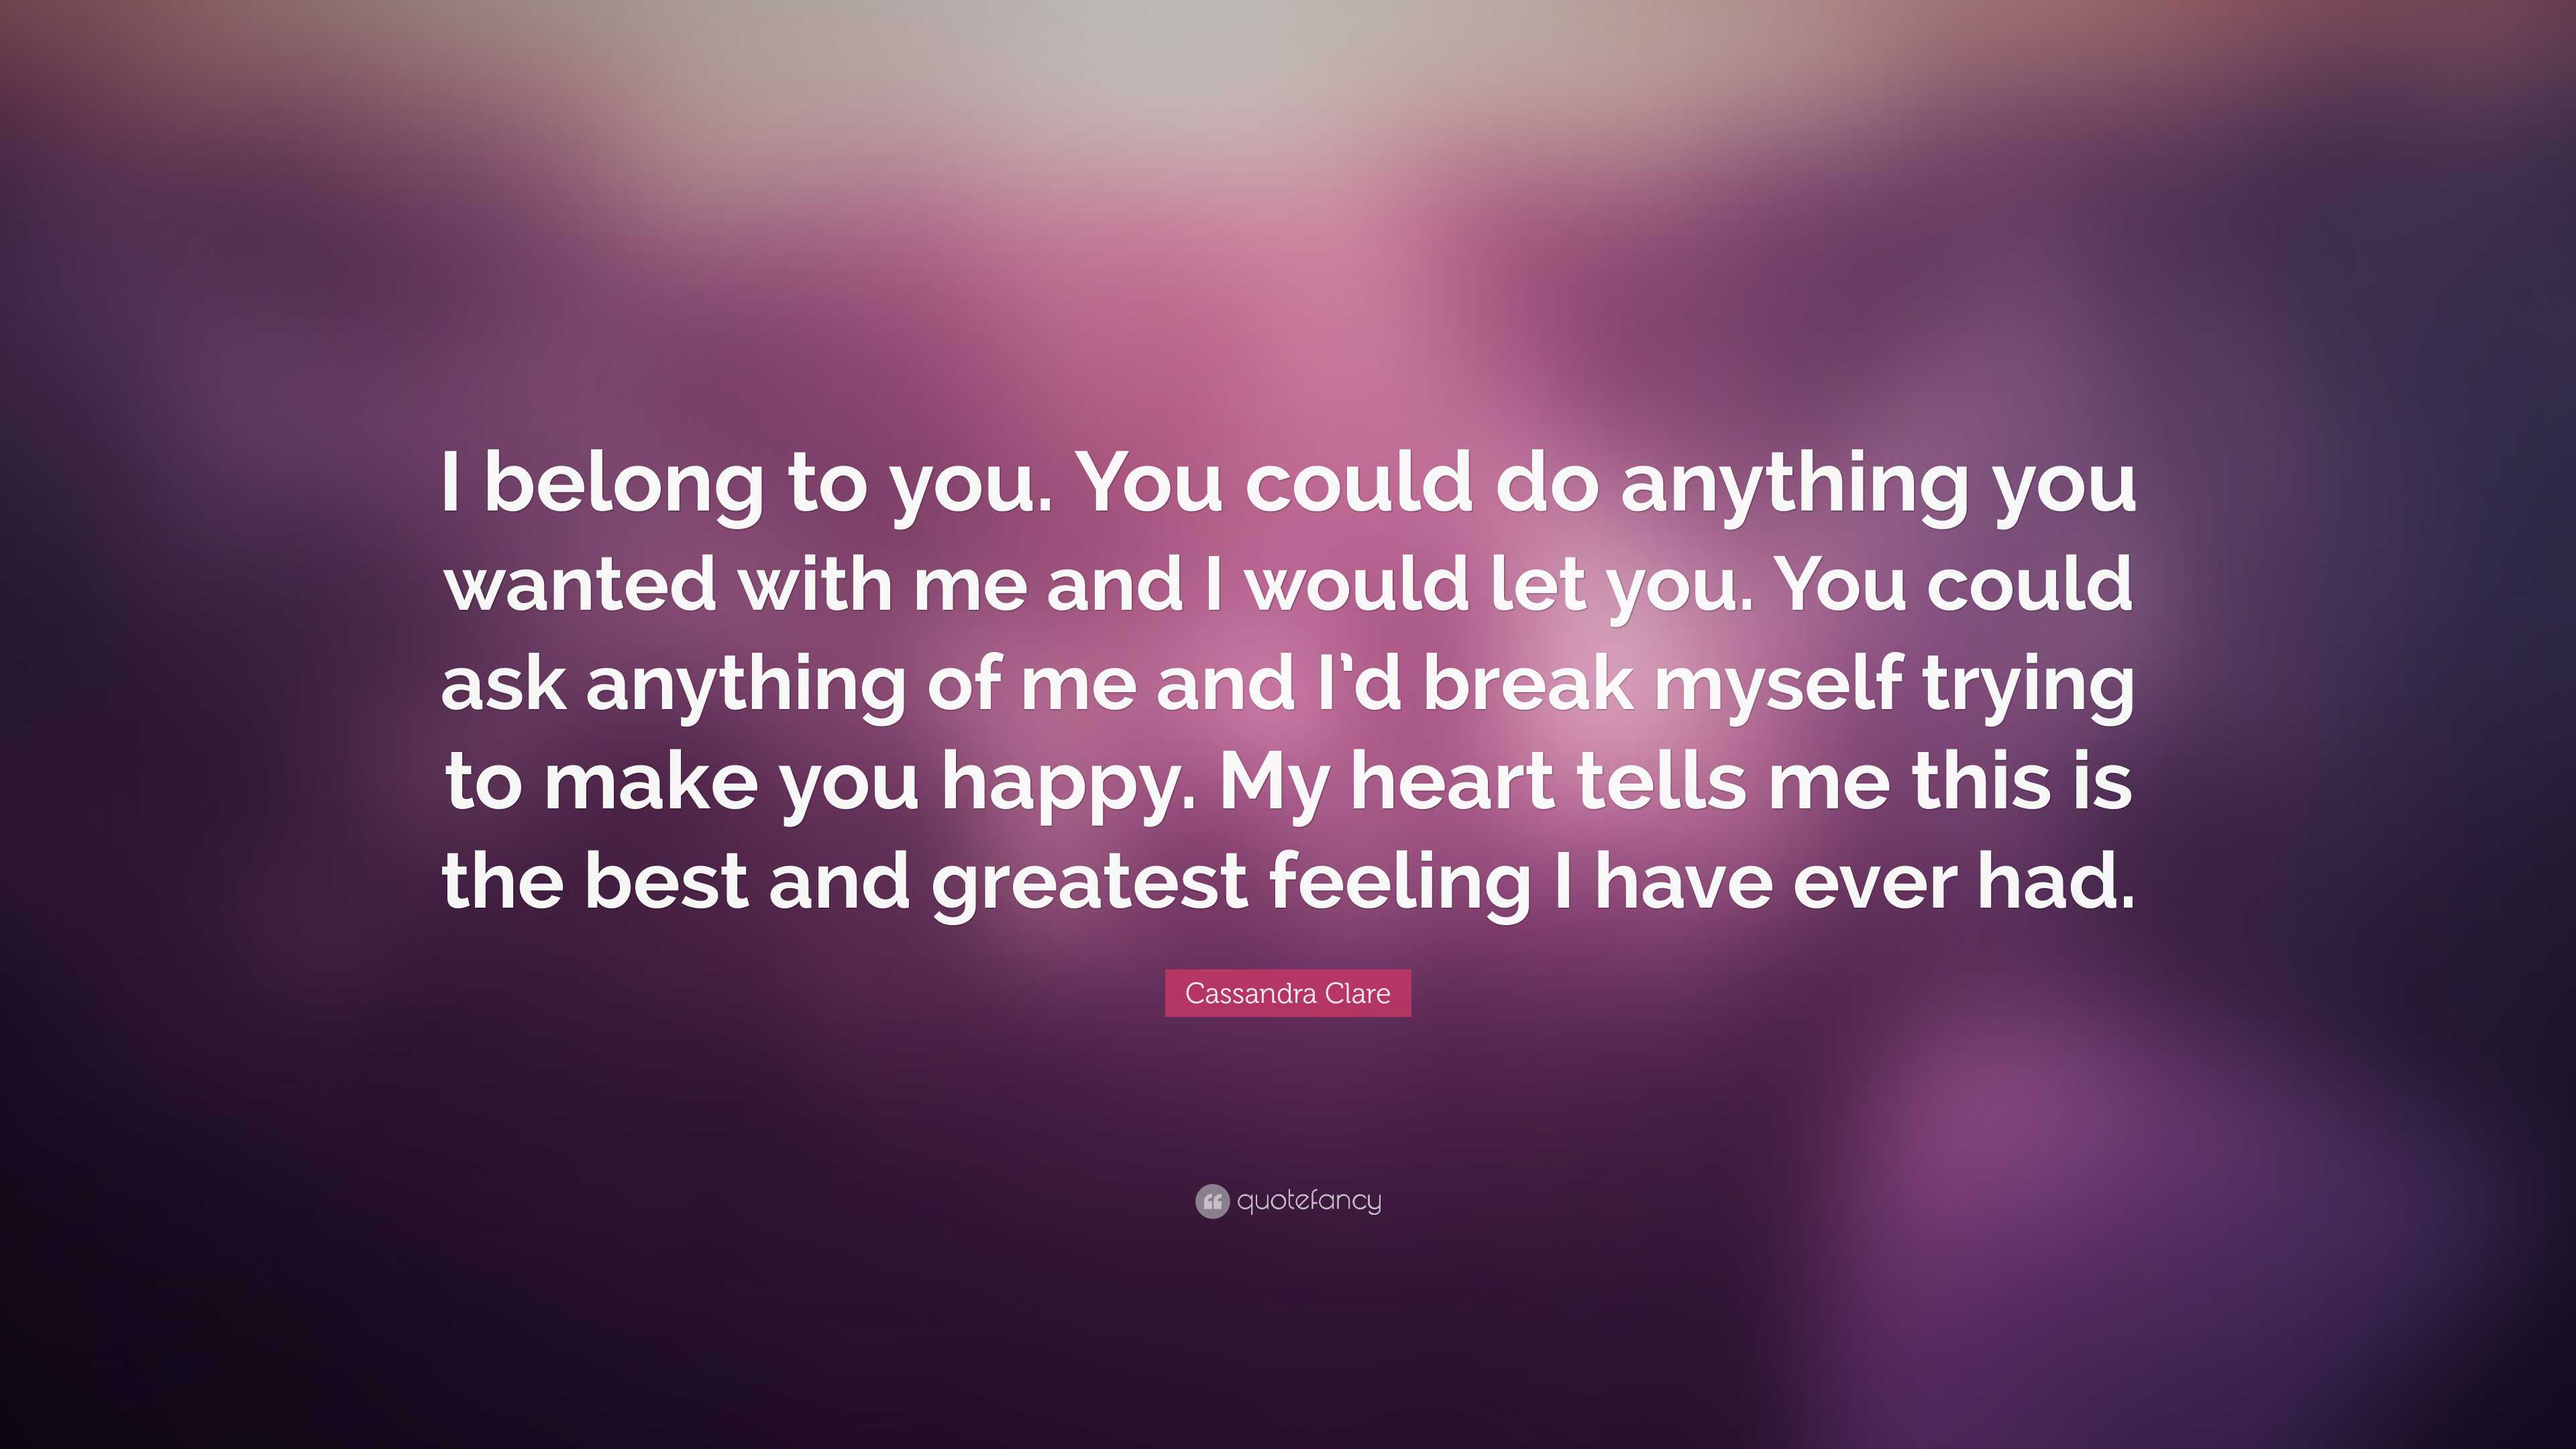 Cassandra Clare Quote: “I belong to you. You could do anything you